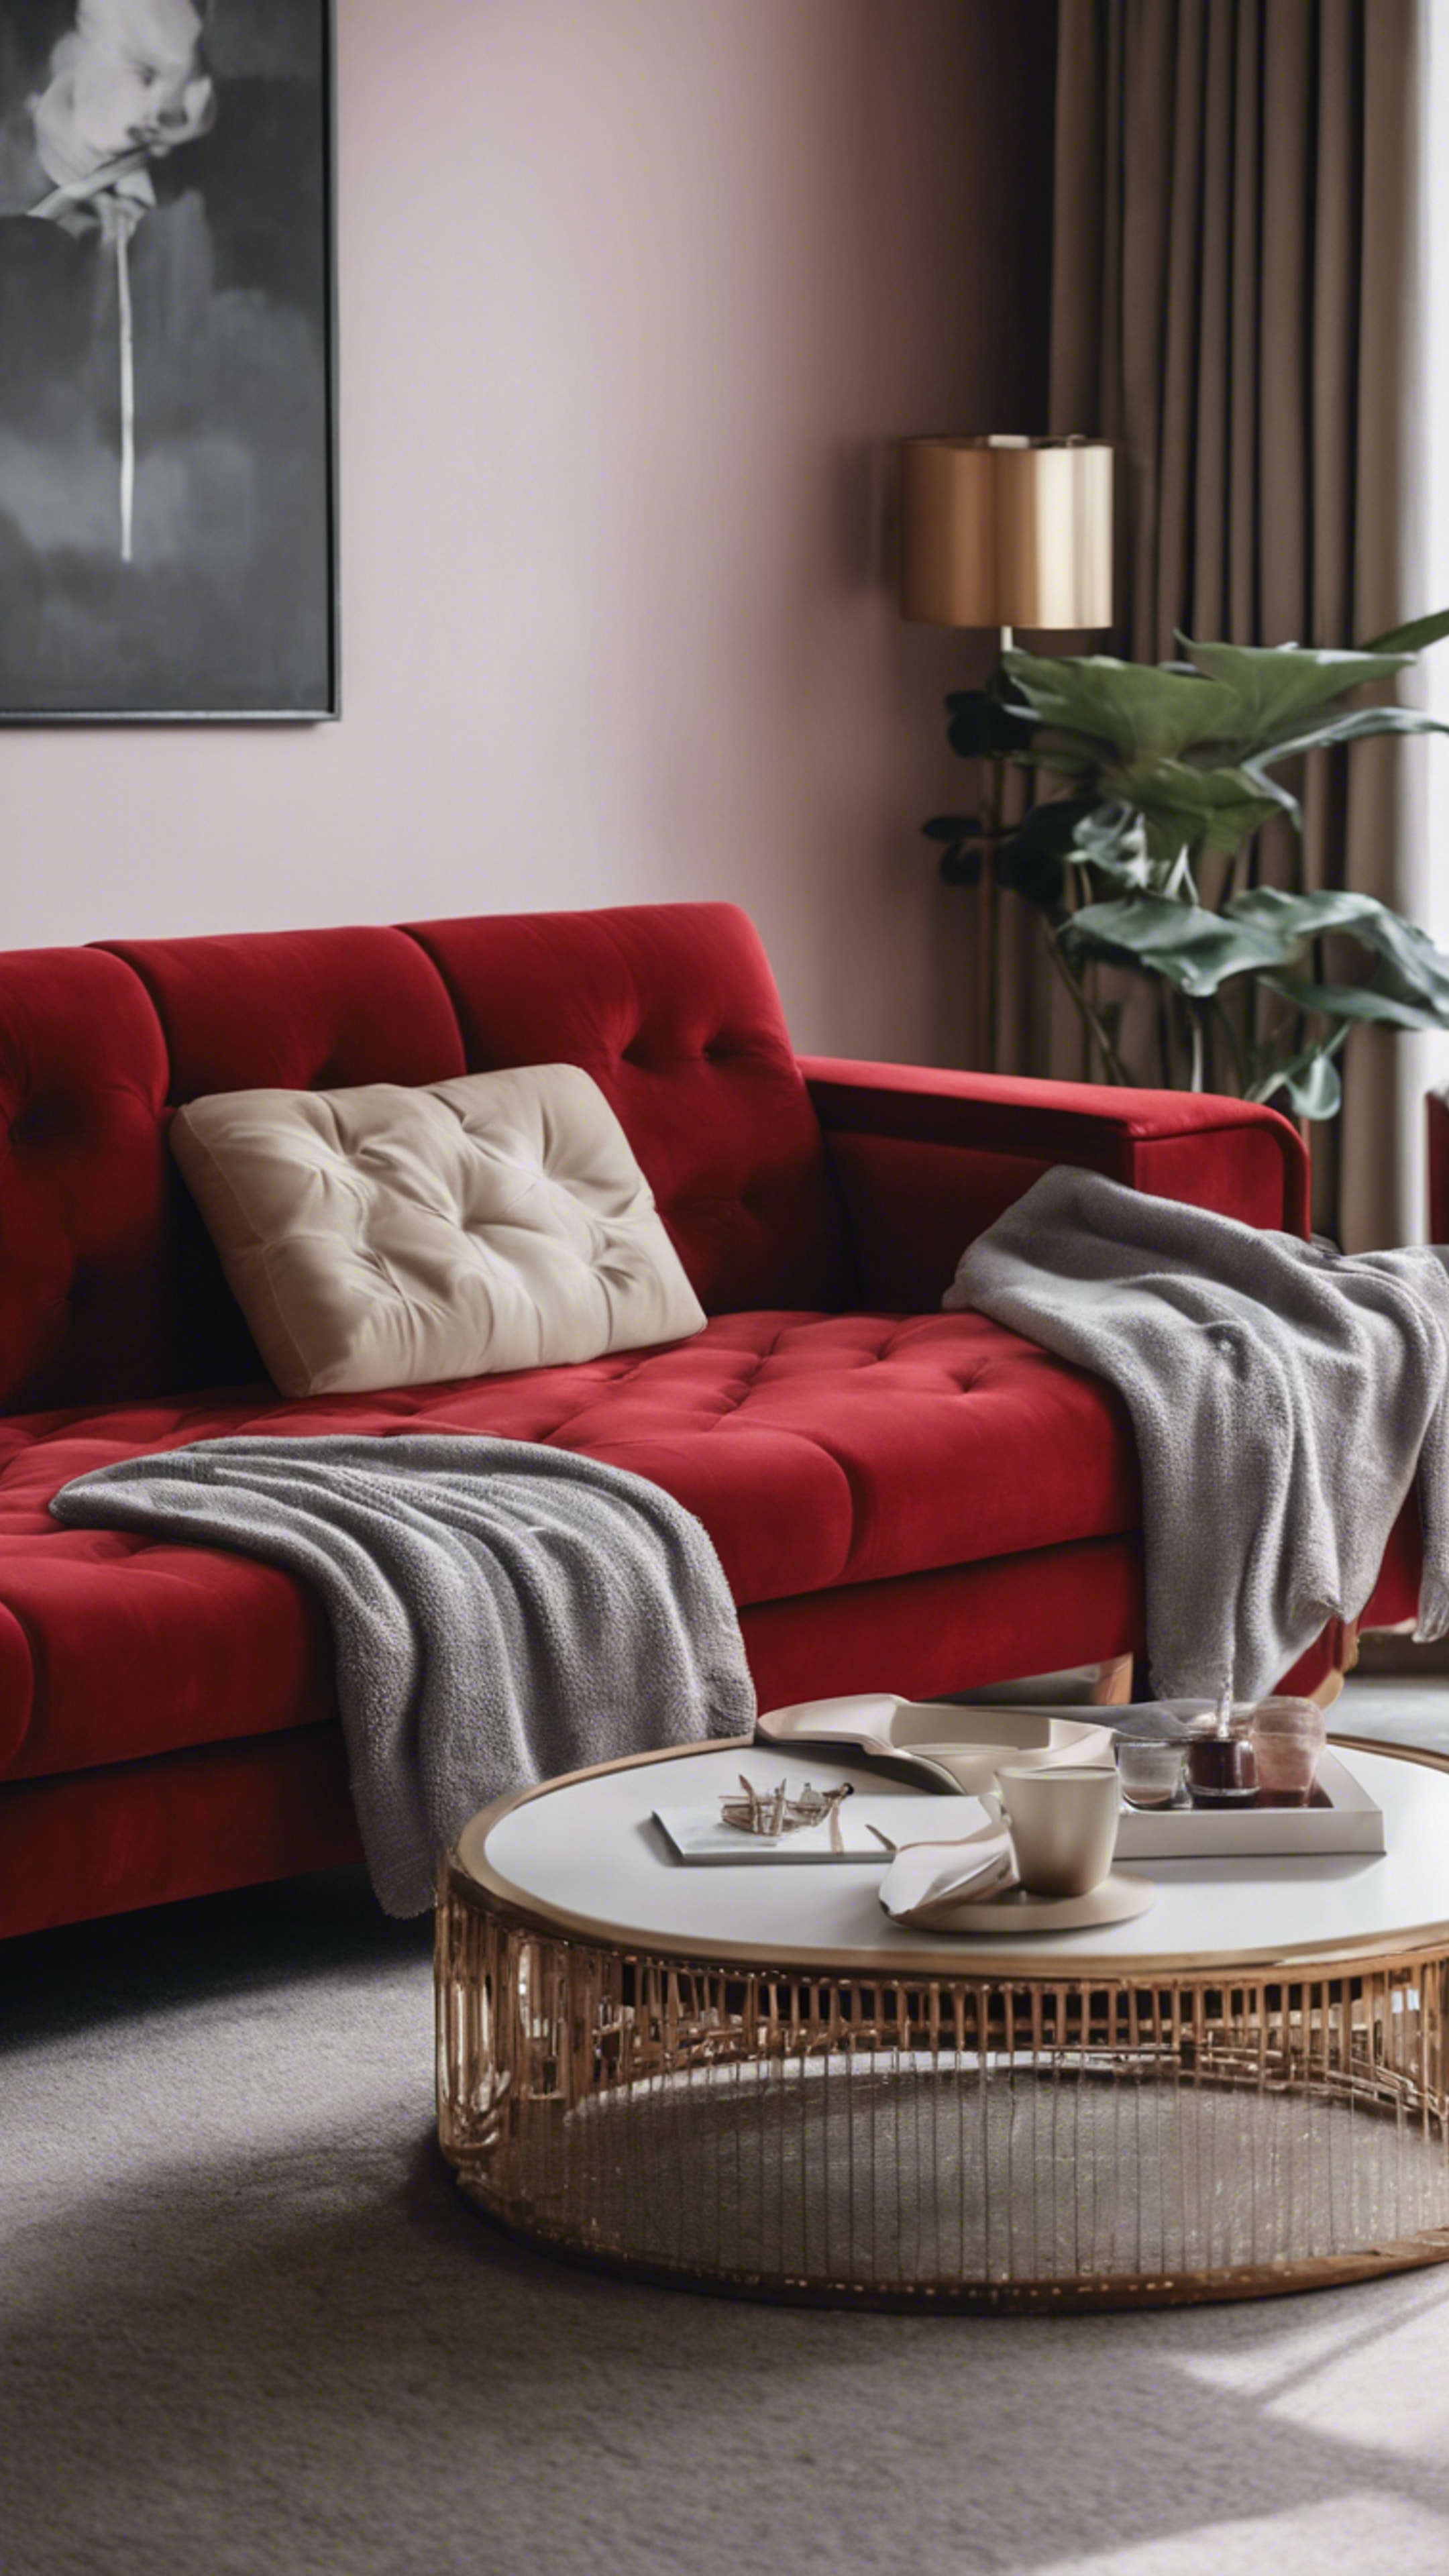 A luxurious red velvet sofa in a minimalistic modern living room, its color standing out in an otherwise neutral scene. Papel de parede[9f5c54c2b7d04d069b86]